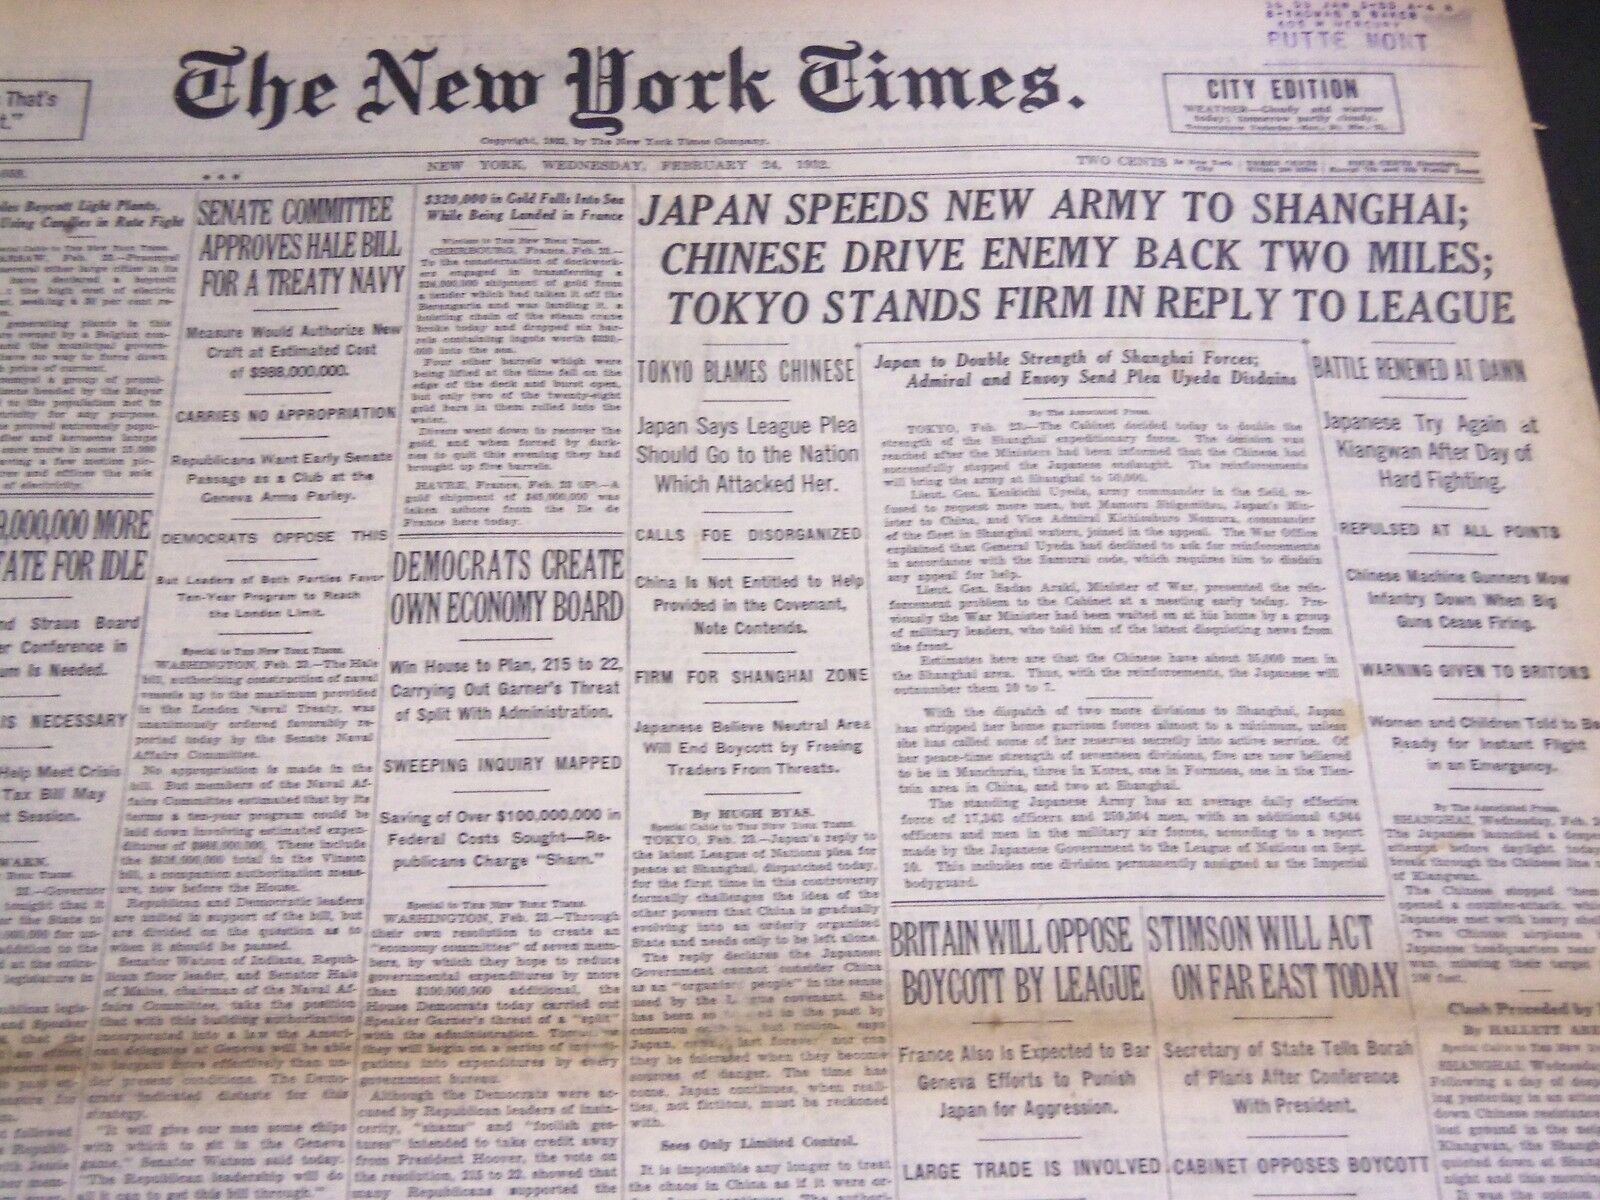 1932 FEBRUARY 24 NEW YORK TIMES - JAPAN SPEEDS NEW ARMY TO SHANGHAI - NT 4782